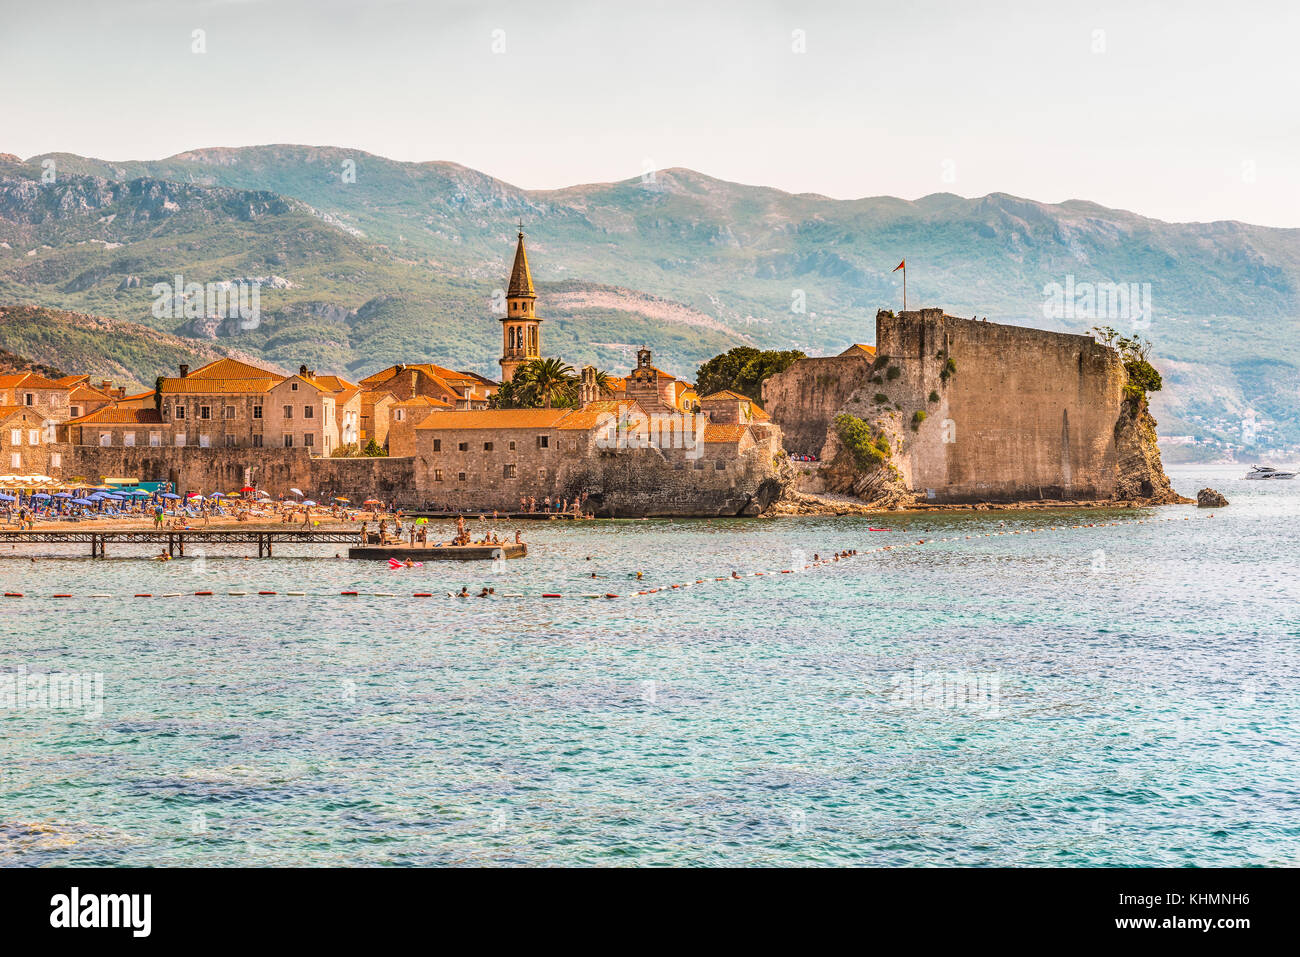 Budva, Montenegro - August 18, 2017: View of the old town and the citadel. The Balkans, the Adriatic Sea, Europe. Stock Photo